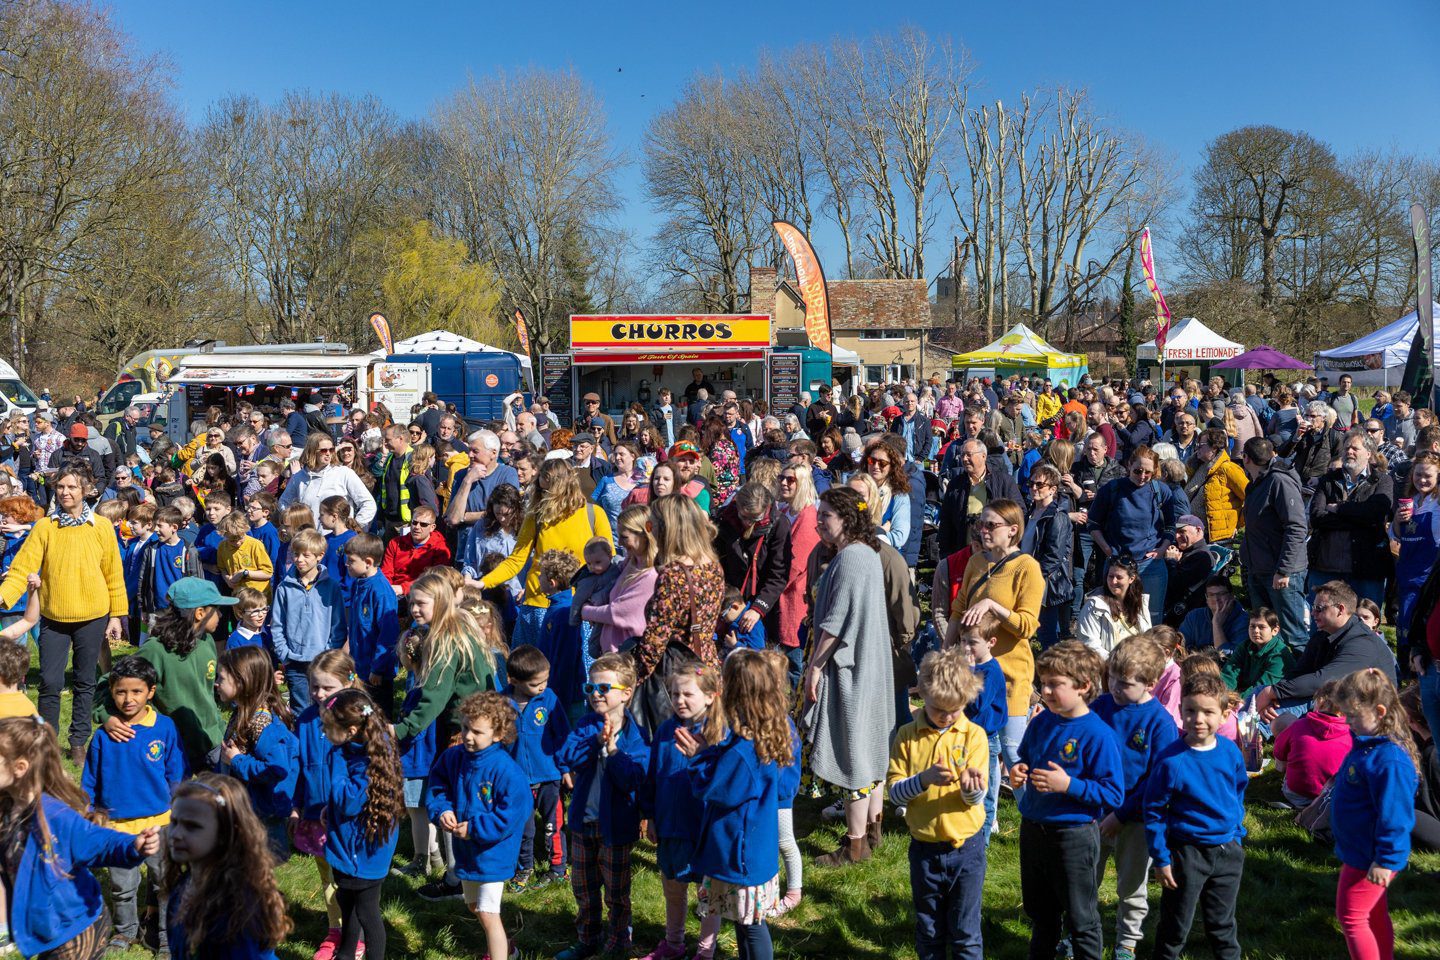 The weather was perfect at Thriplow for their Annual Daffodil Festival